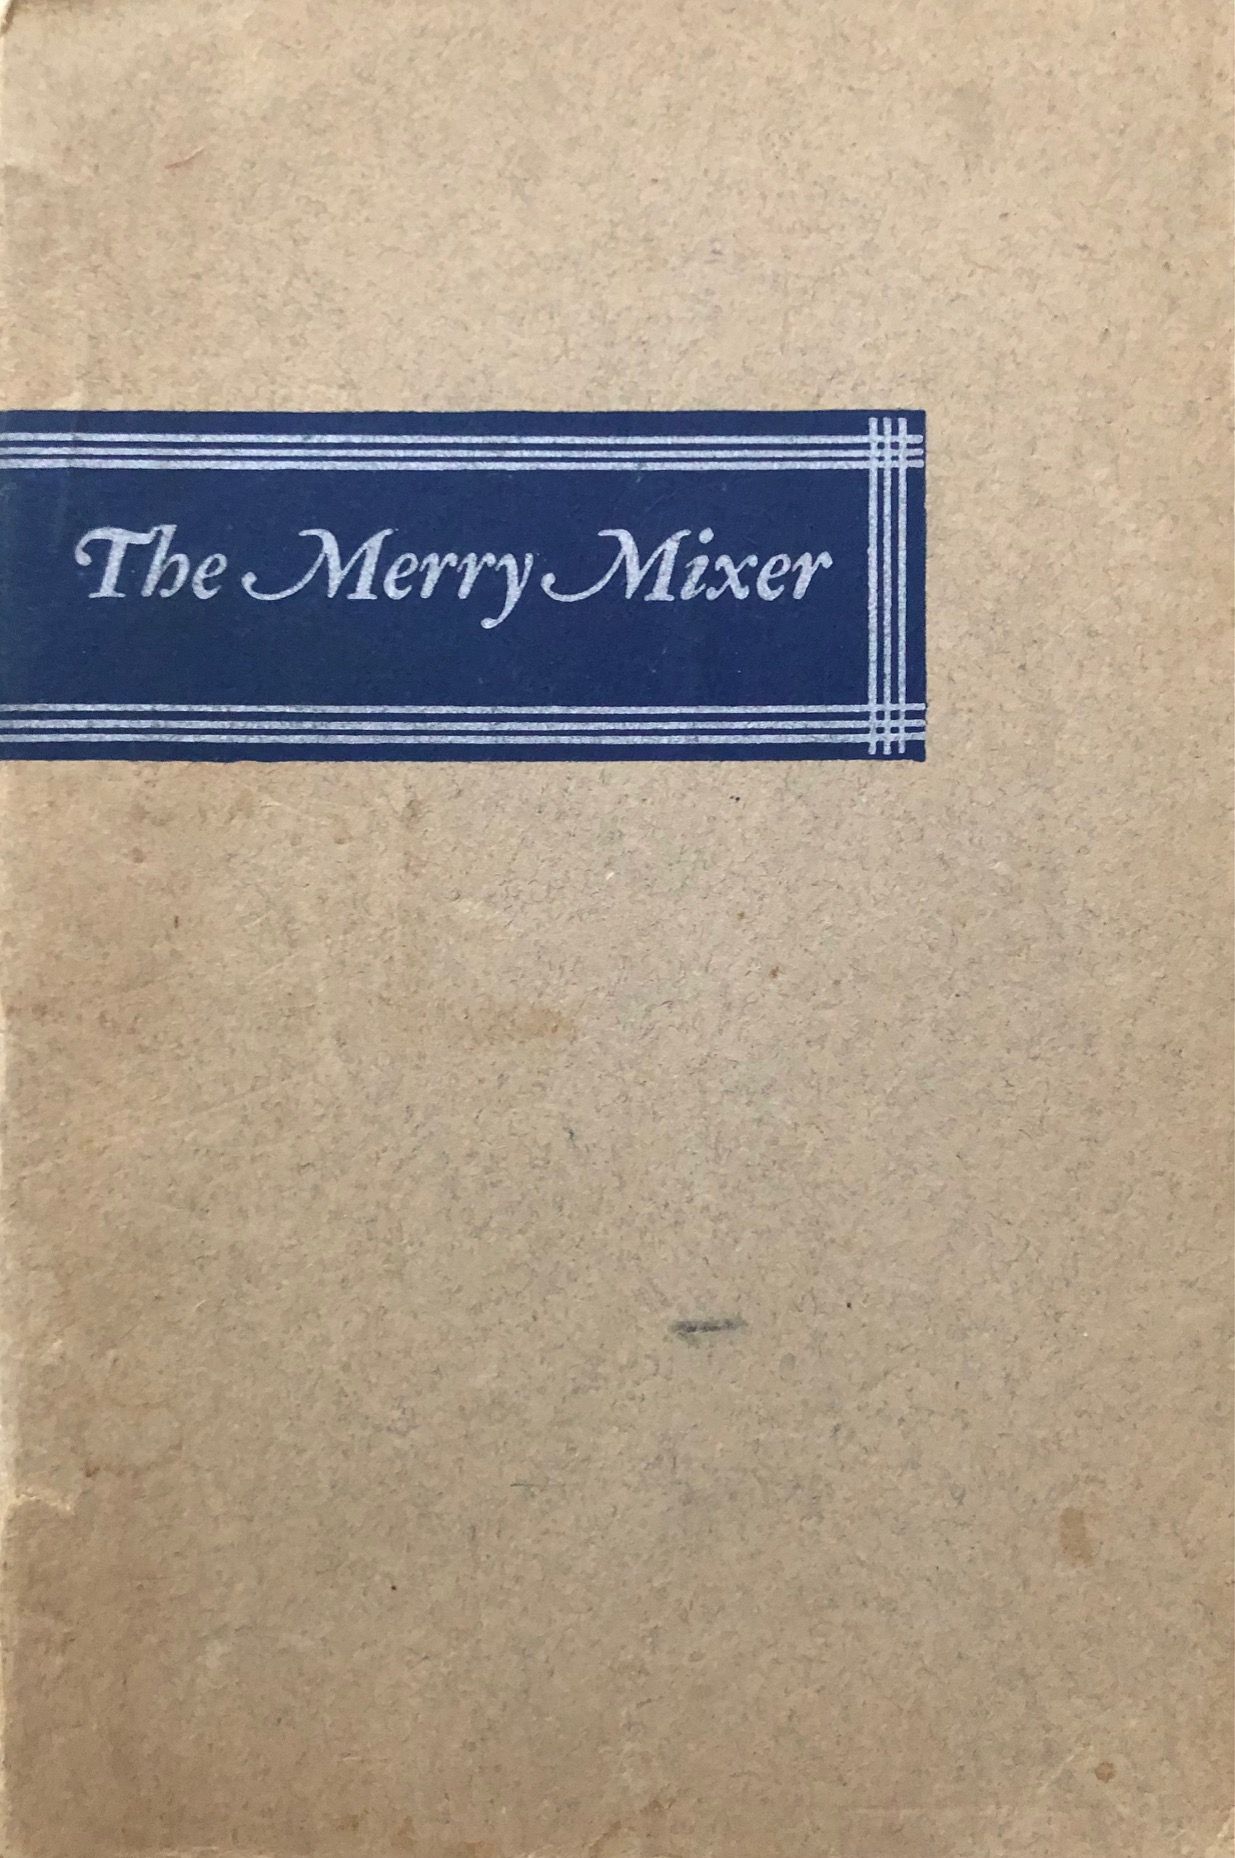 (Cocktails) Guyer, William. The Merry Mixer or Cocktails and their Ilk